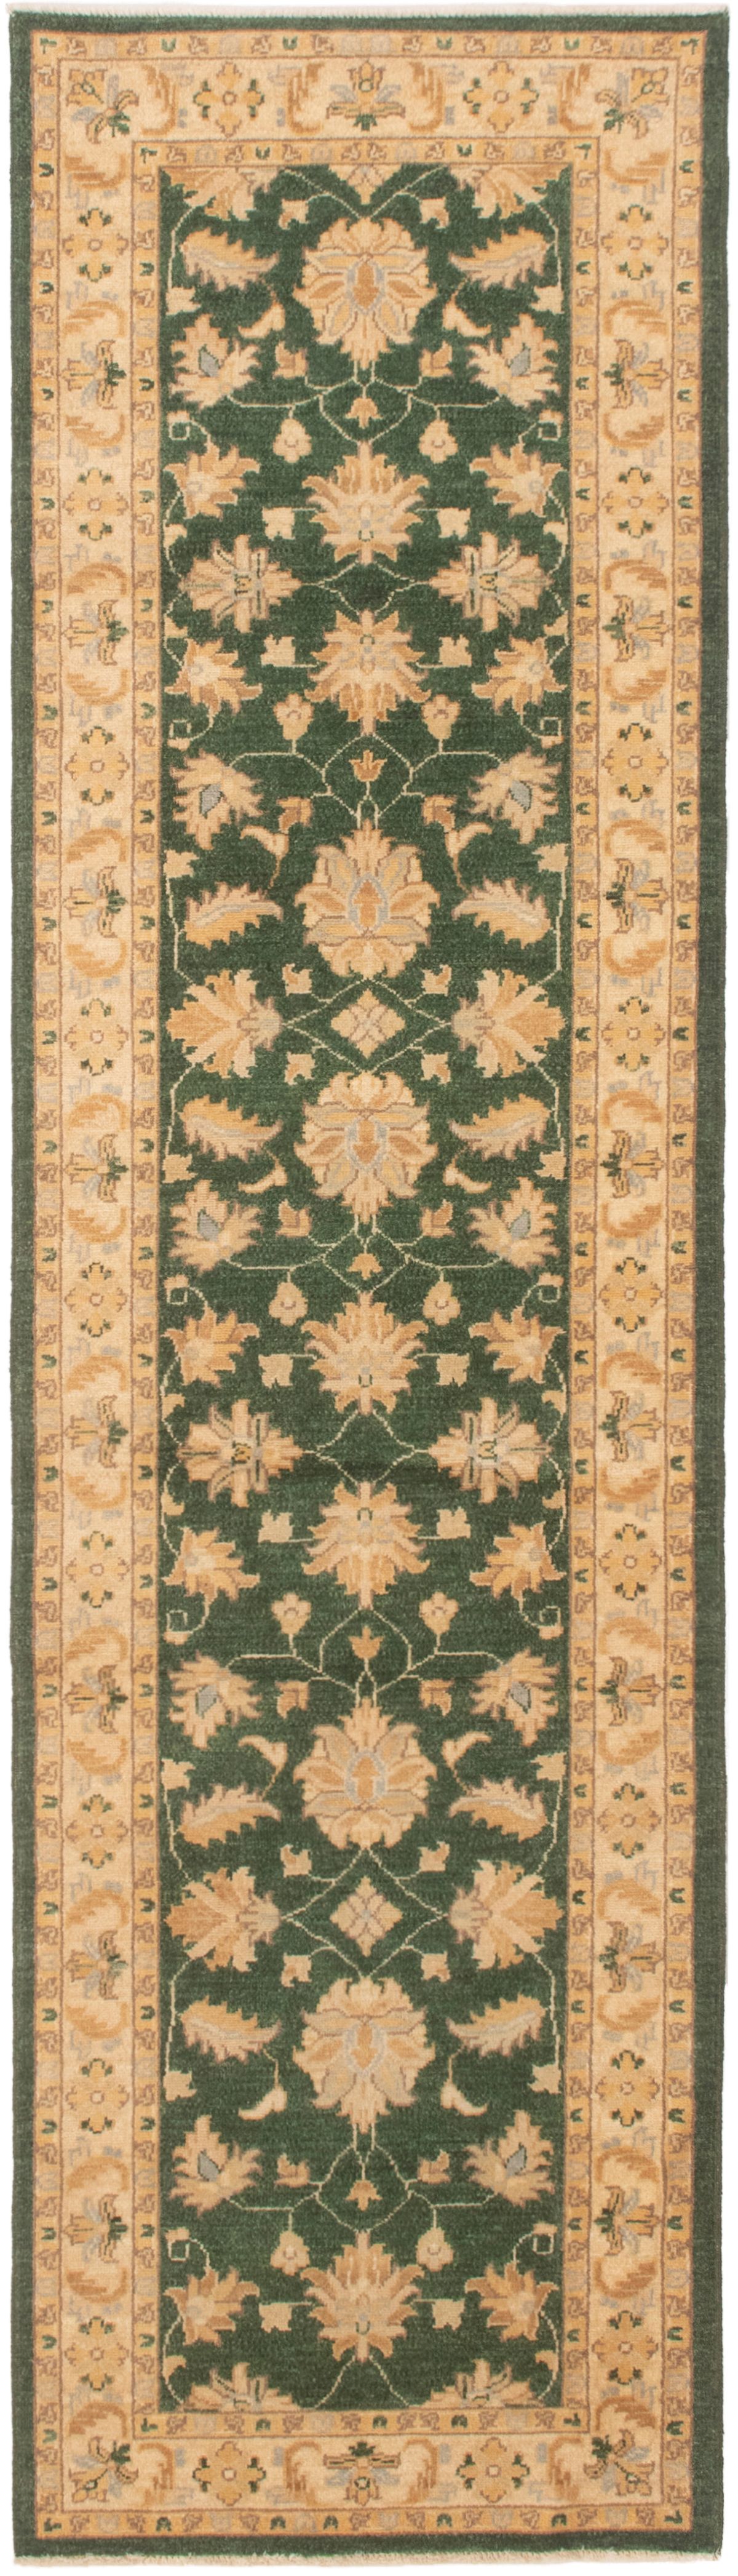 Hand-knotted Peshawar Oushak Green Wool Rug 2'7" x 9'8" Size: 2'7" x 9'8"  